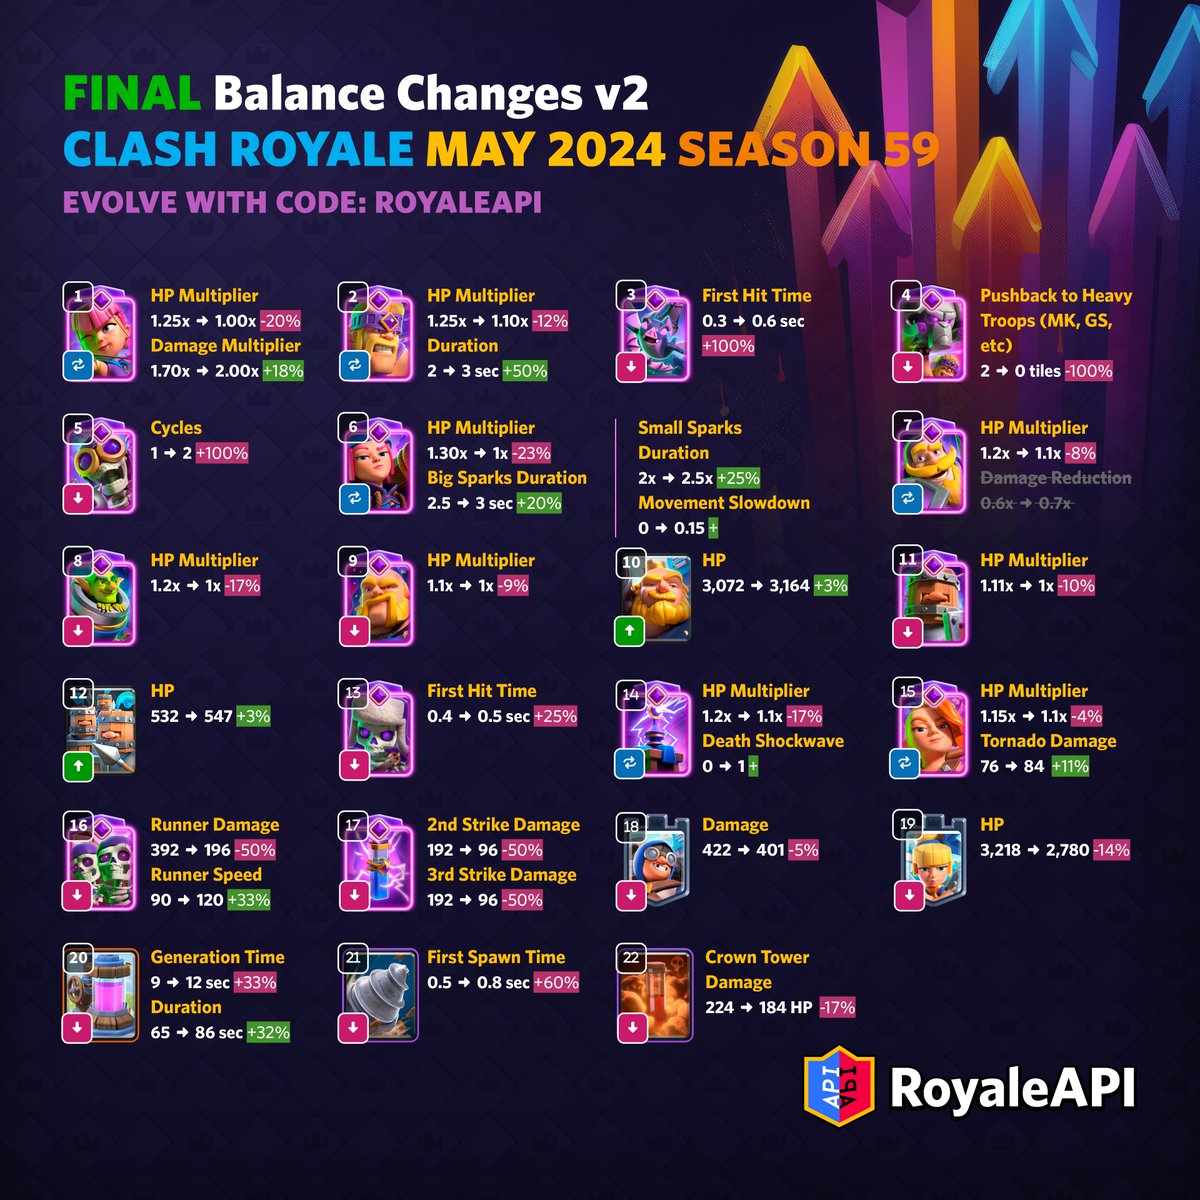 Updated Clash Royale Final Balance for clarity and correction. 22. Poison. 224 → 184 Crown tower Damage. on.royaleapi.com/s59b